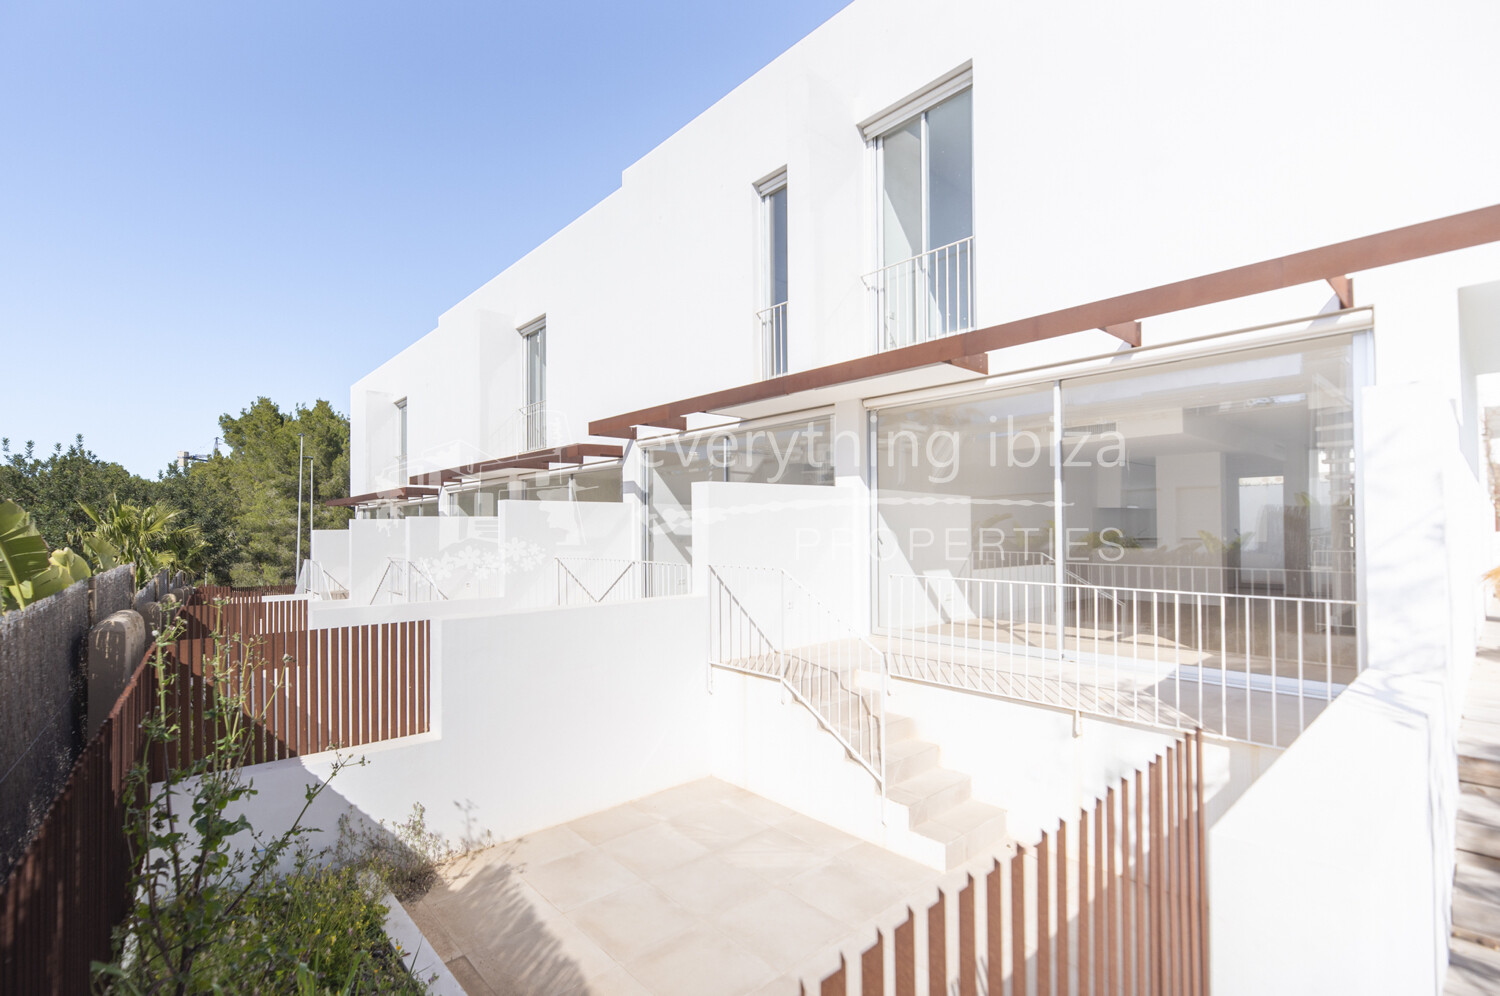 New Modern Quality Townhouses Close to Local Amenities & Beach, ref. 1717, for sale in Ibiza by everything ibiza Properties